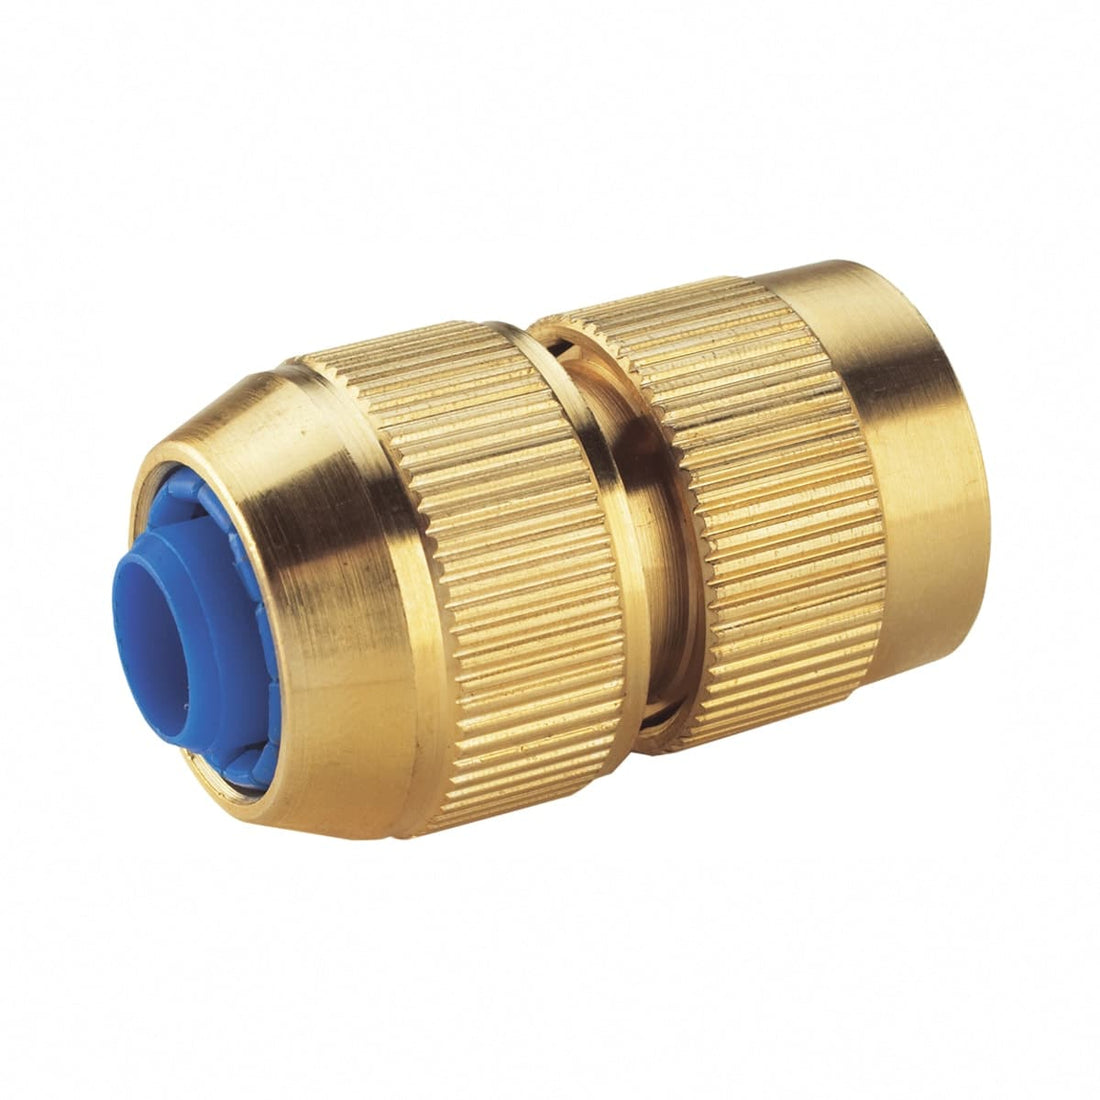 BRASS QUICK COUPLING FOR 12 AND 15 MM DIAMETER PIPES COLORTAP - best price from Maltashopper.com BR500410124